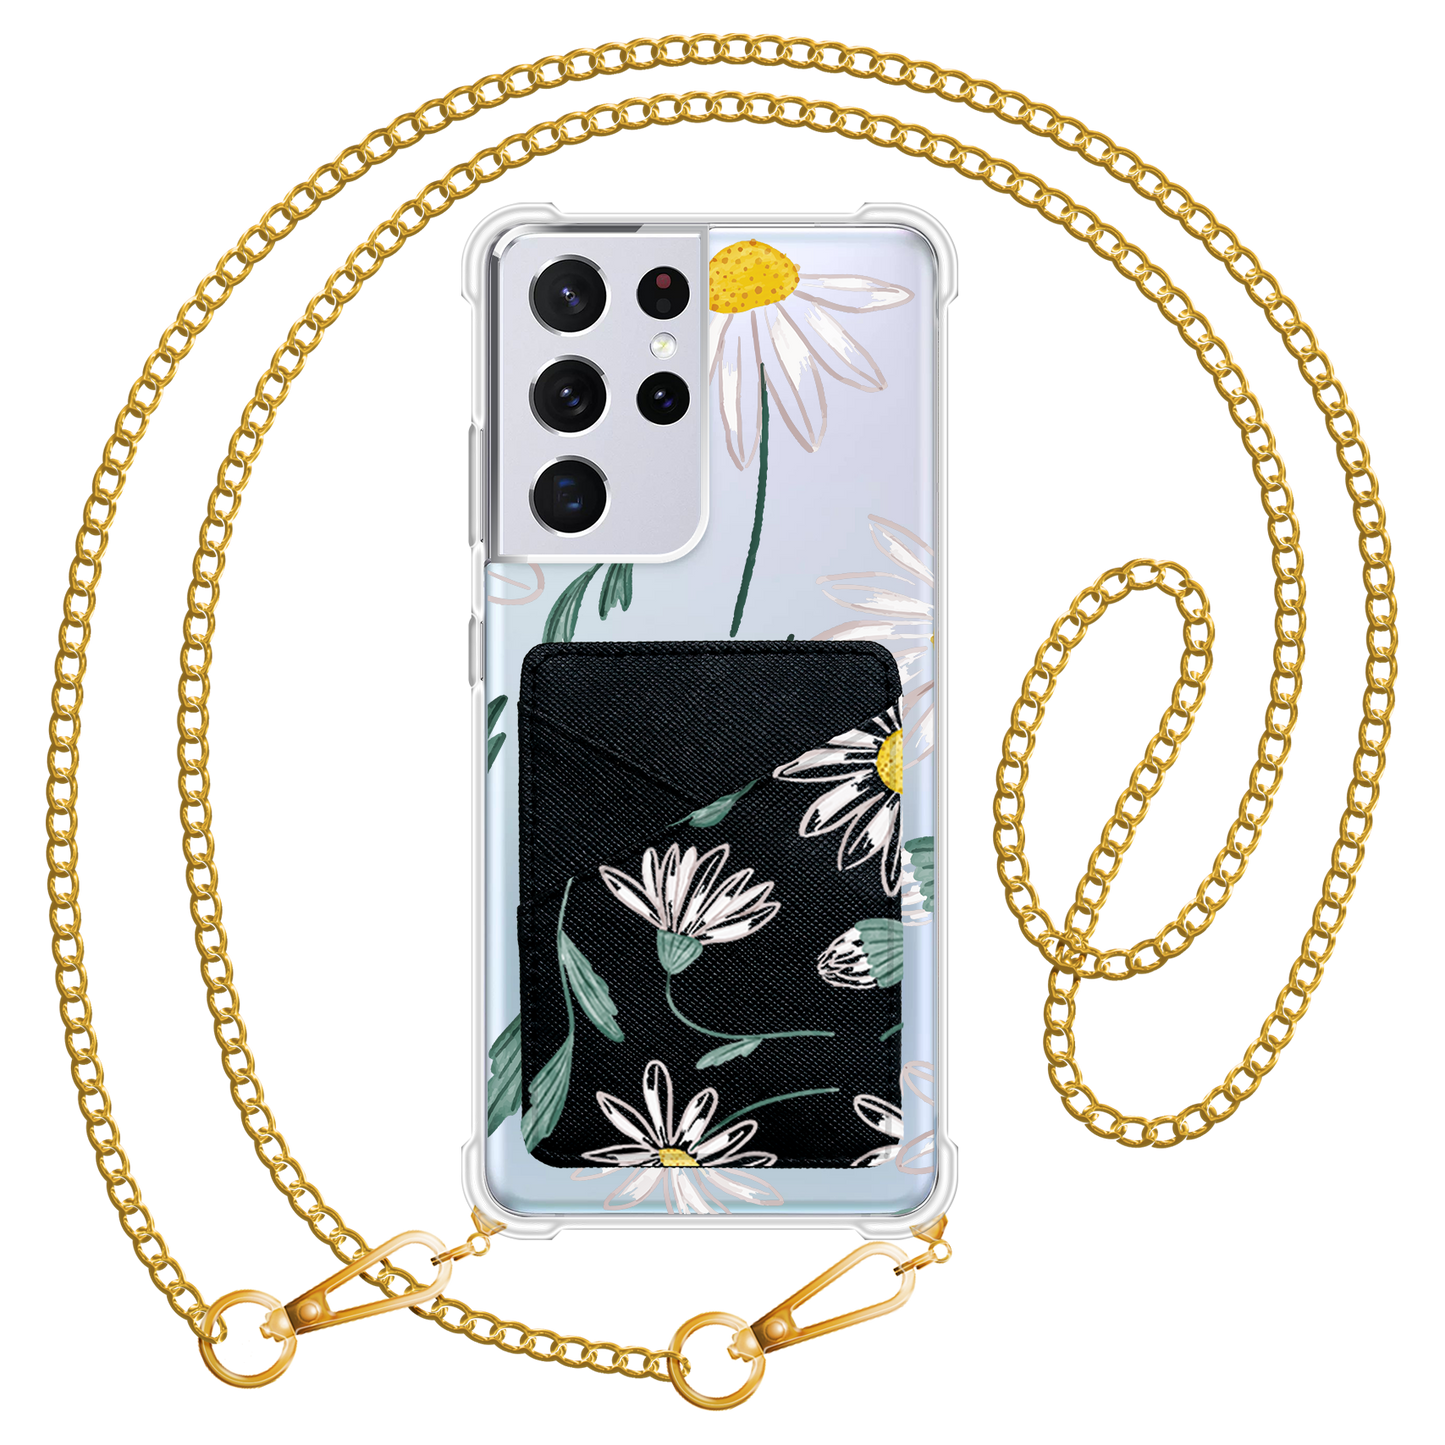 Android Phone Wallet Case - April Daisy 2.0